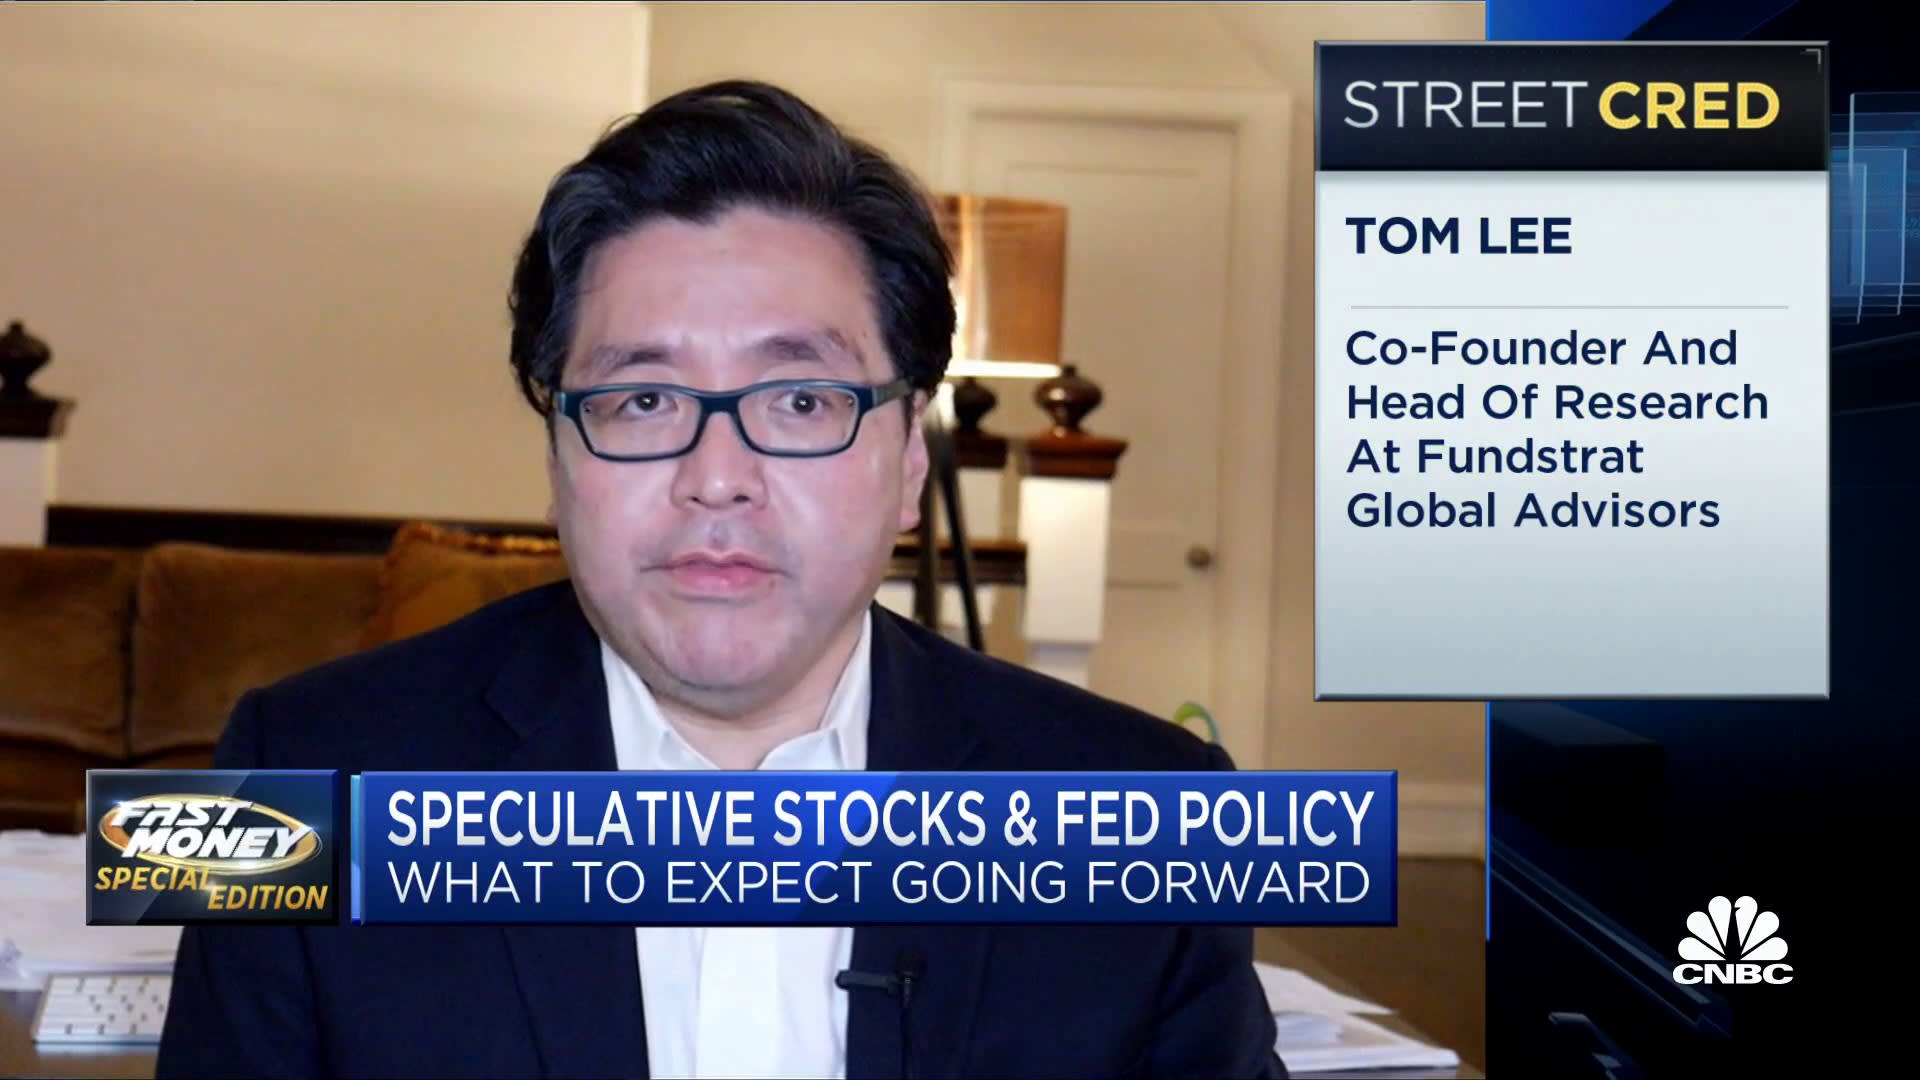 Tapering is going to be a huge adjustment, says Fundstrat's Tom Lee